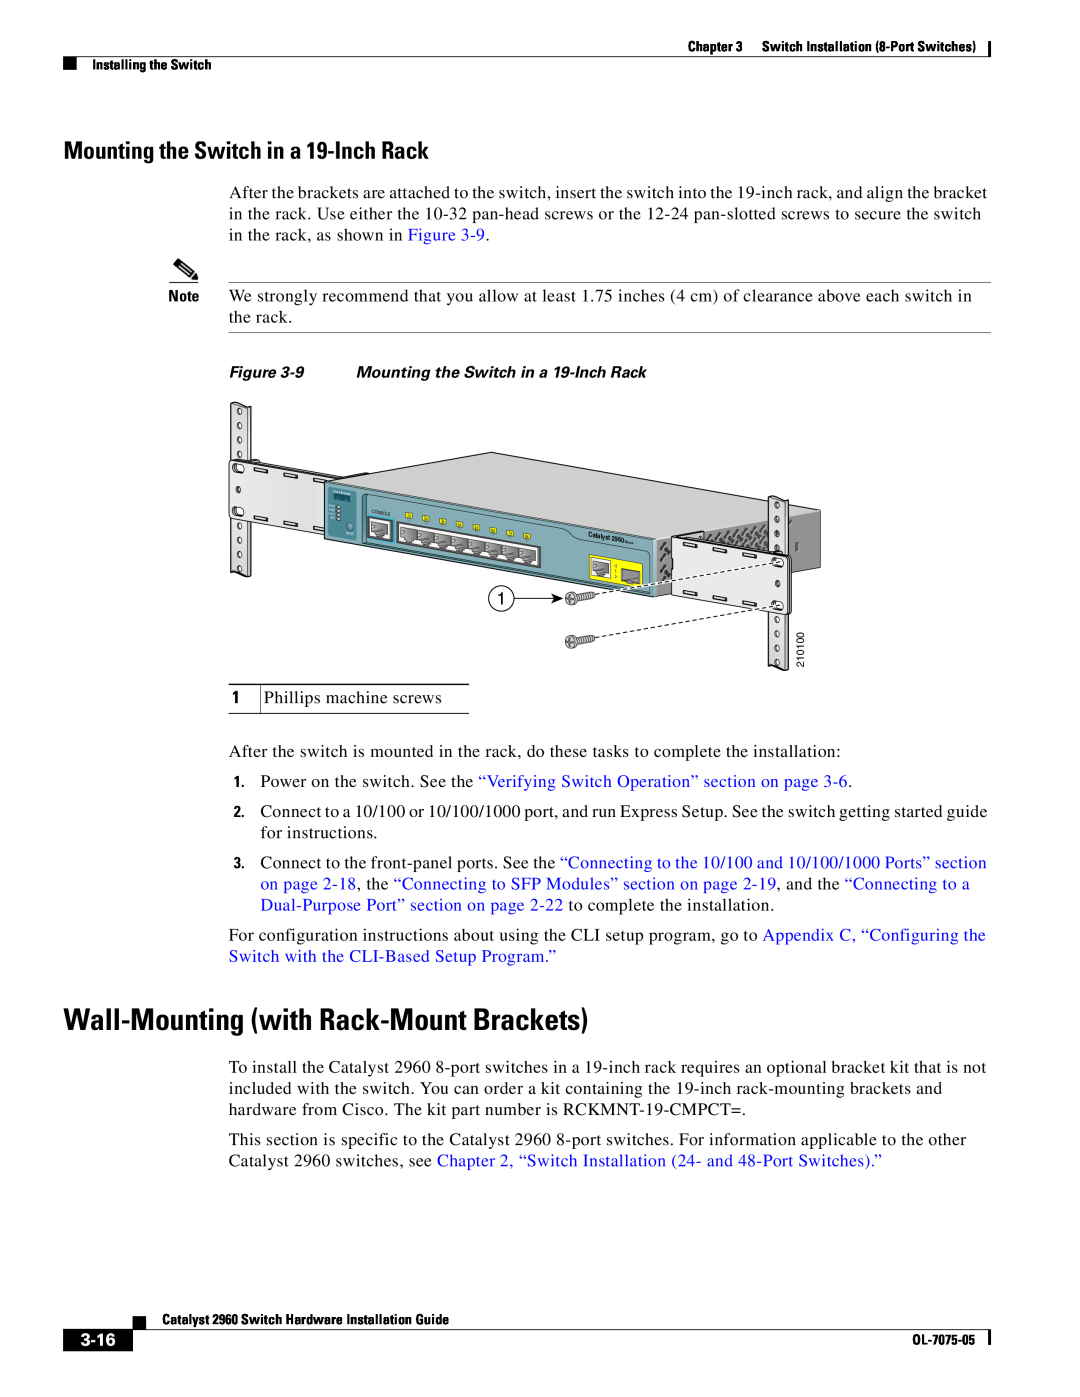 Cisco Systems 2960 specifications Wall-Mounting with Rack-Mount Brackets, Mounting the Switch in a 19-Inch Rack, 3-16 